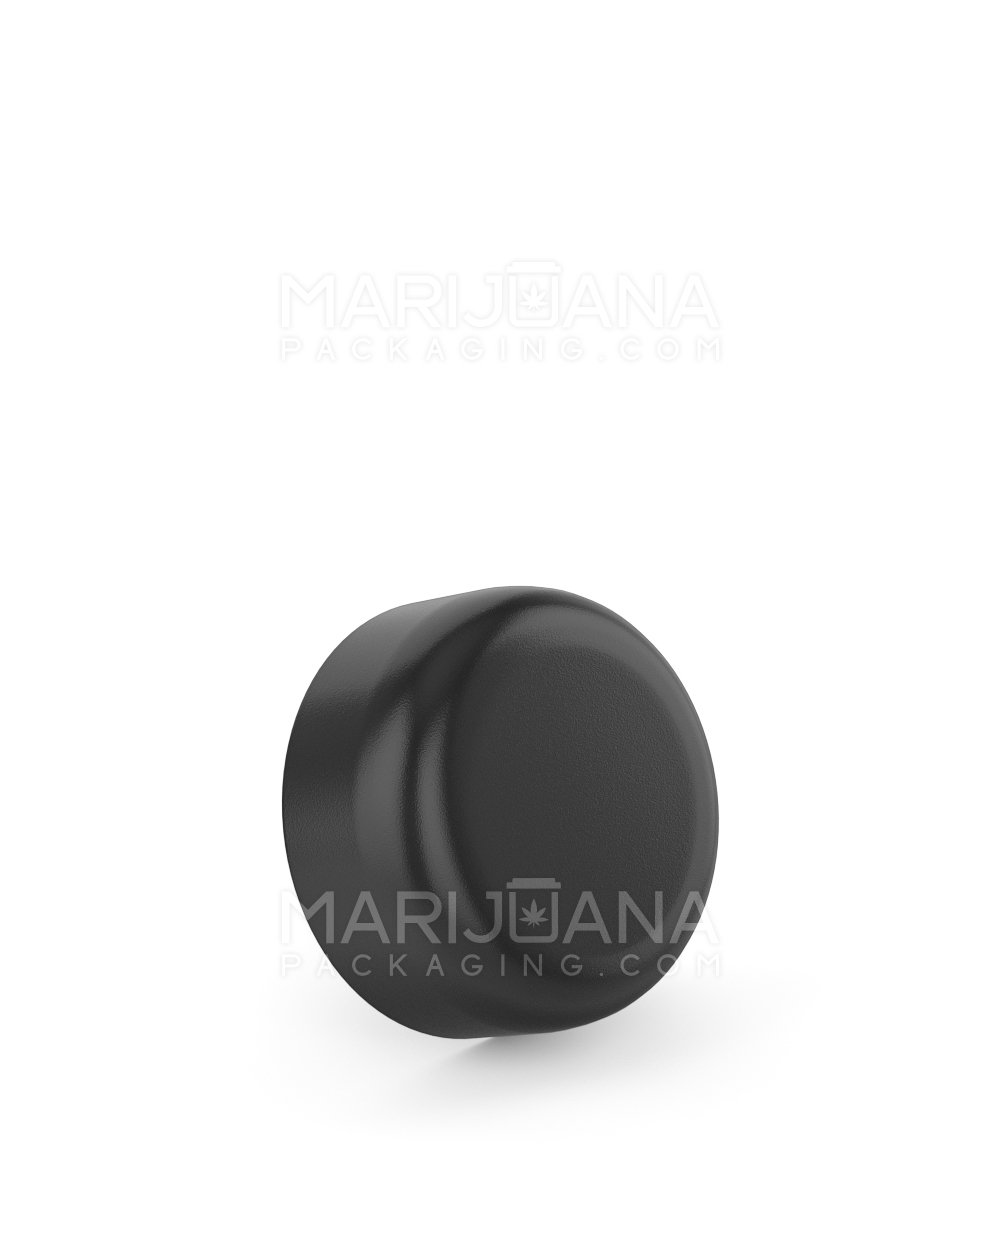 Child Resistant | Smooth Push Down & Turn Plastic Caps w/ Foam Liner | 29mm - Semi Gloss Black - 504 Count - 1